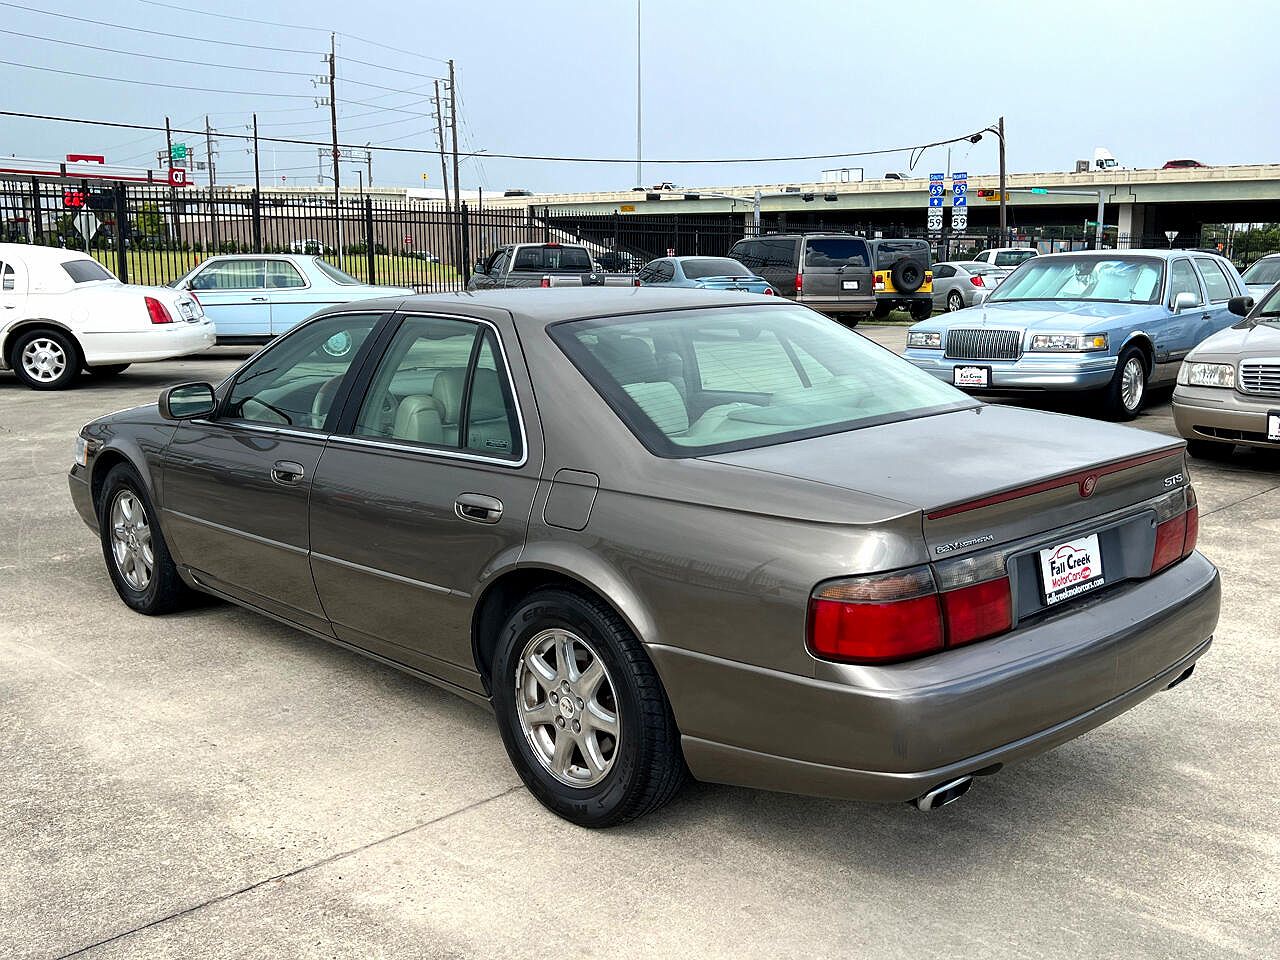 2000 Cadillac Seville STS image 2